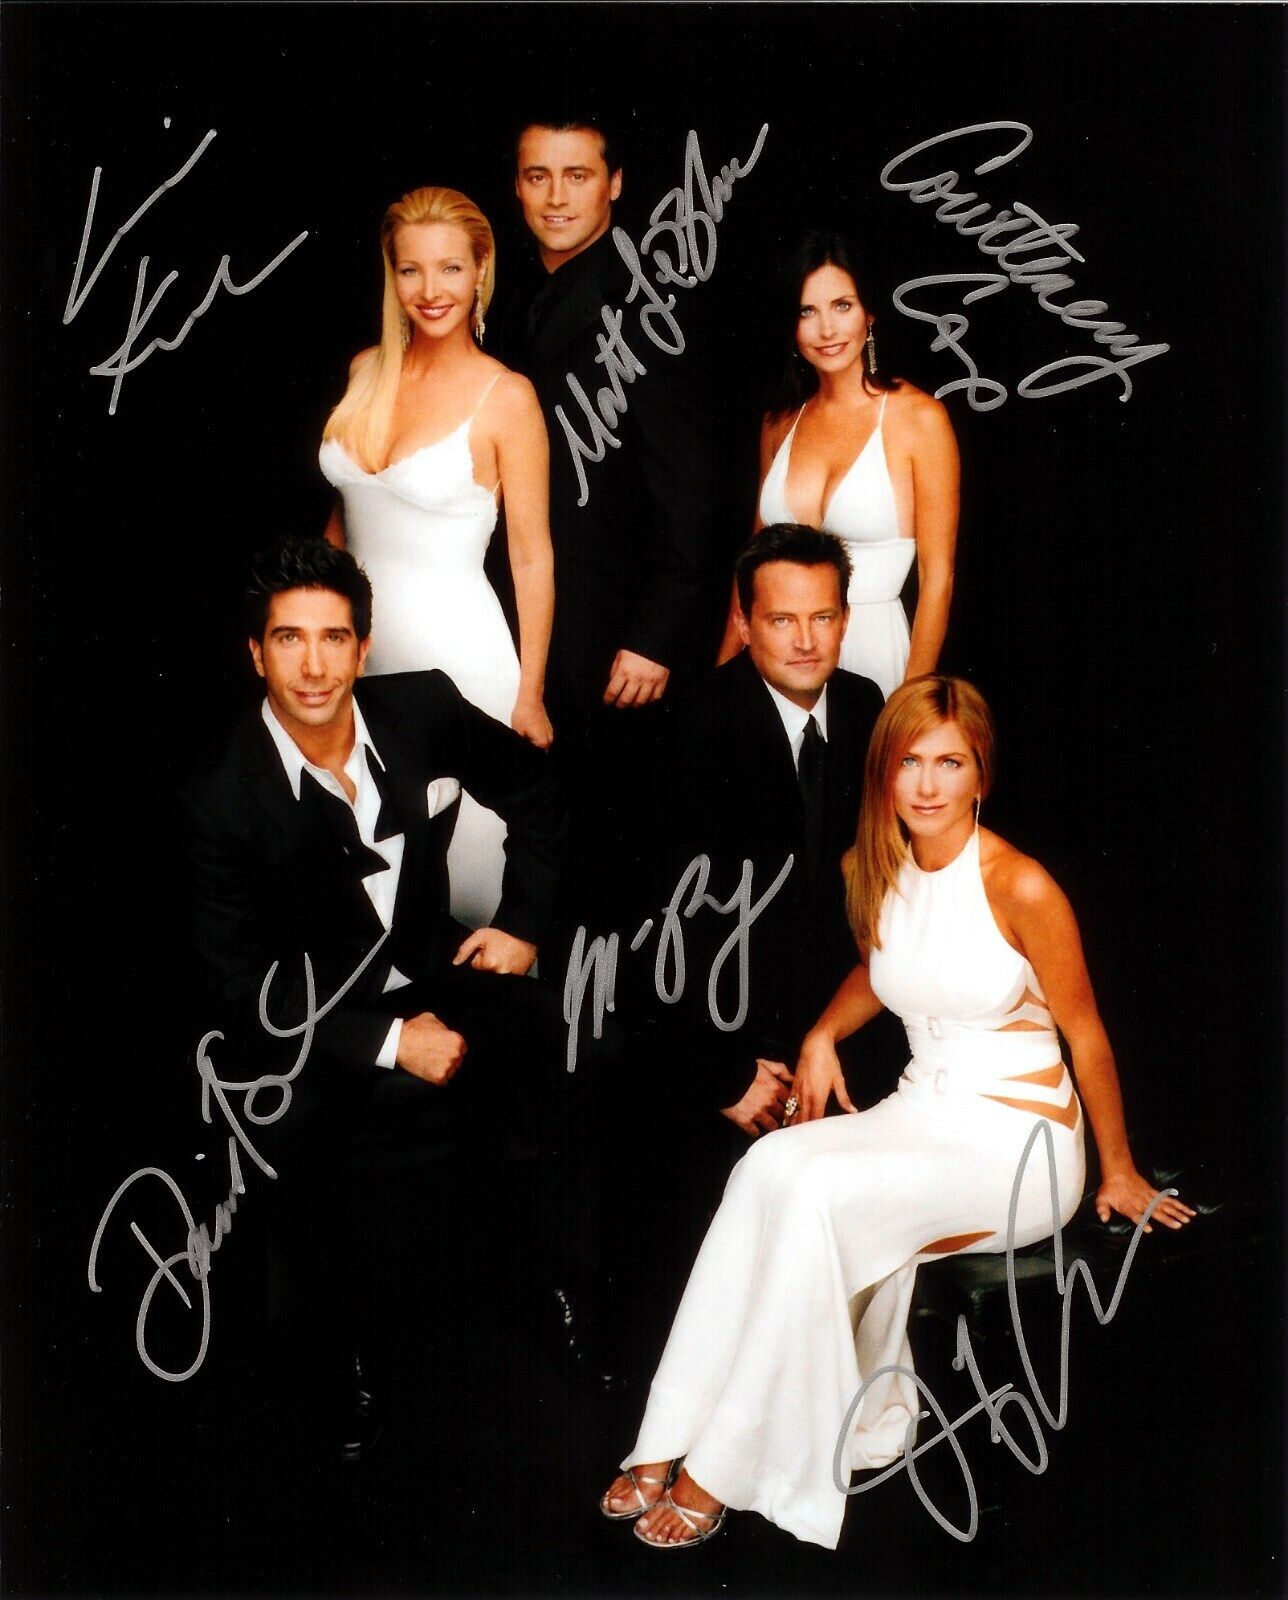 FRIENDS - FULL CAST SIGNED Autographed Signed 8x10 Reprint Photo Poster painting #6 !!